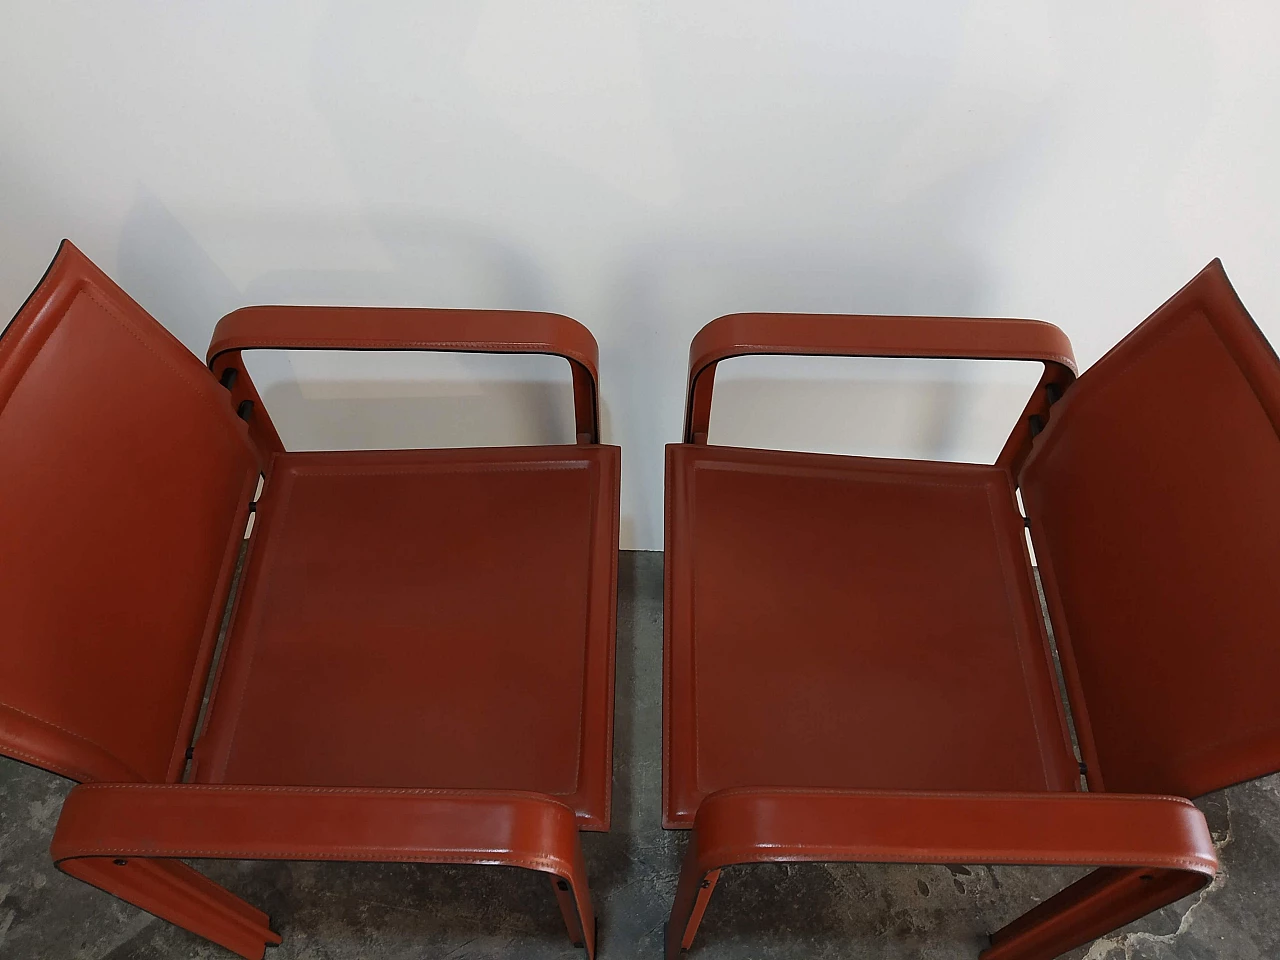 Pair of Golfo dei Poeti chairs by Toussaint & Angeloni manufactured by Matteo Grassi, 1980s 67